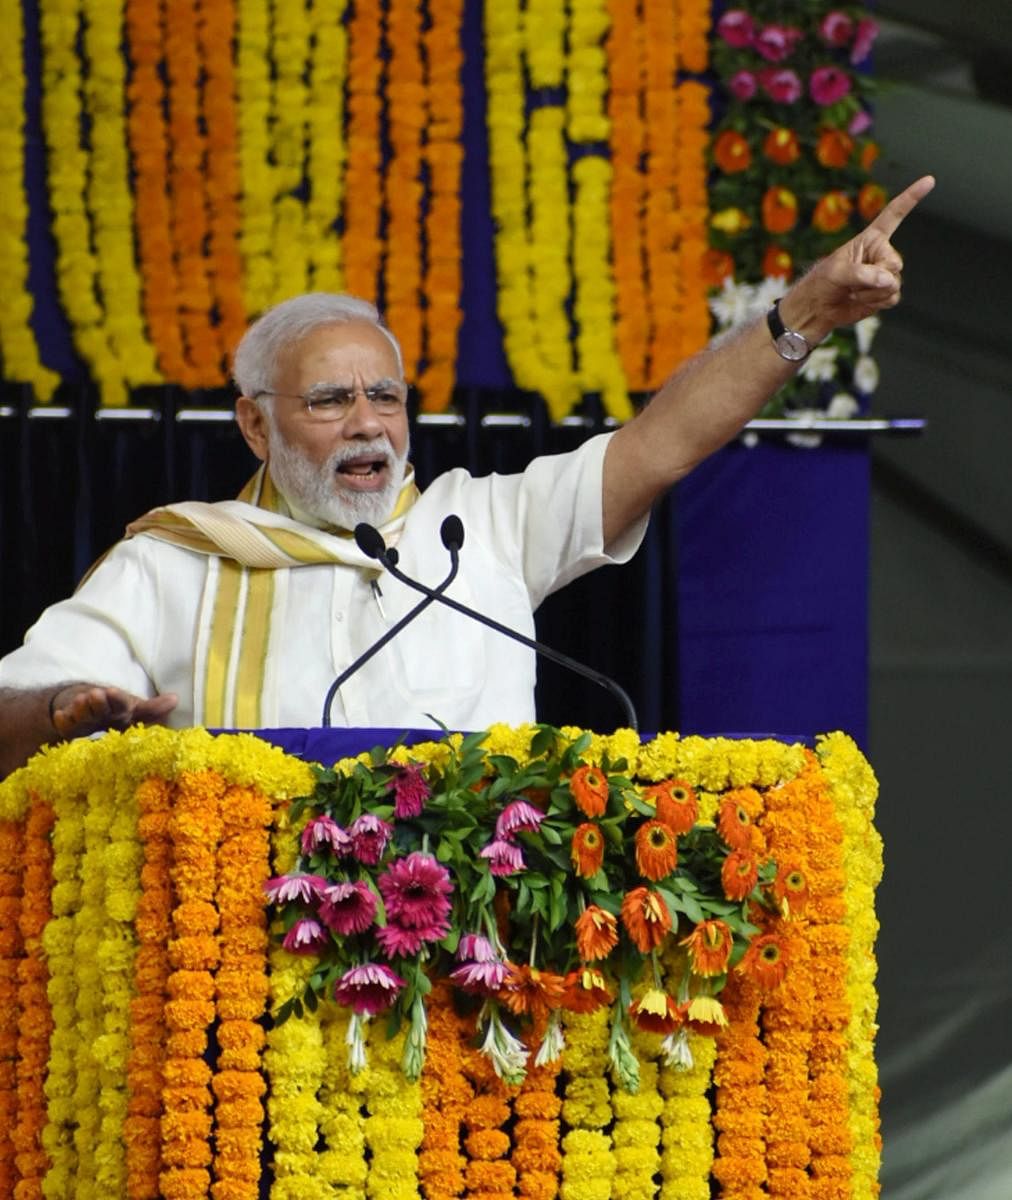 Our soldiers will give befitting reply, says Modi